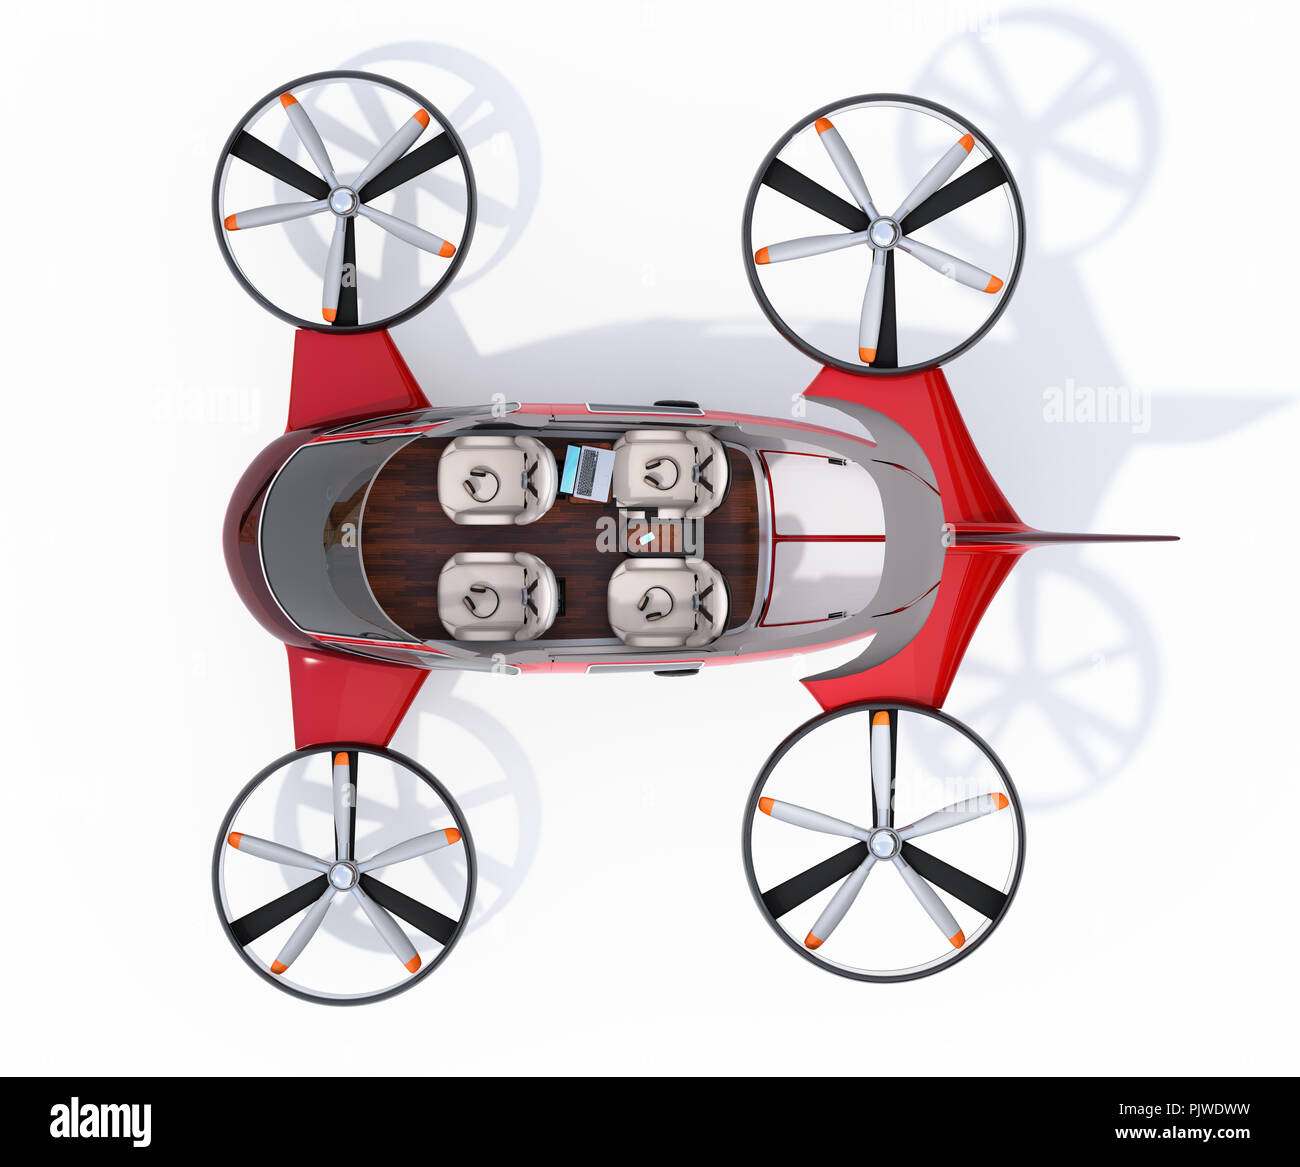 Cutaway view of Passenger Drone with interior layout on white background. 3D rendering image. Stock Photo